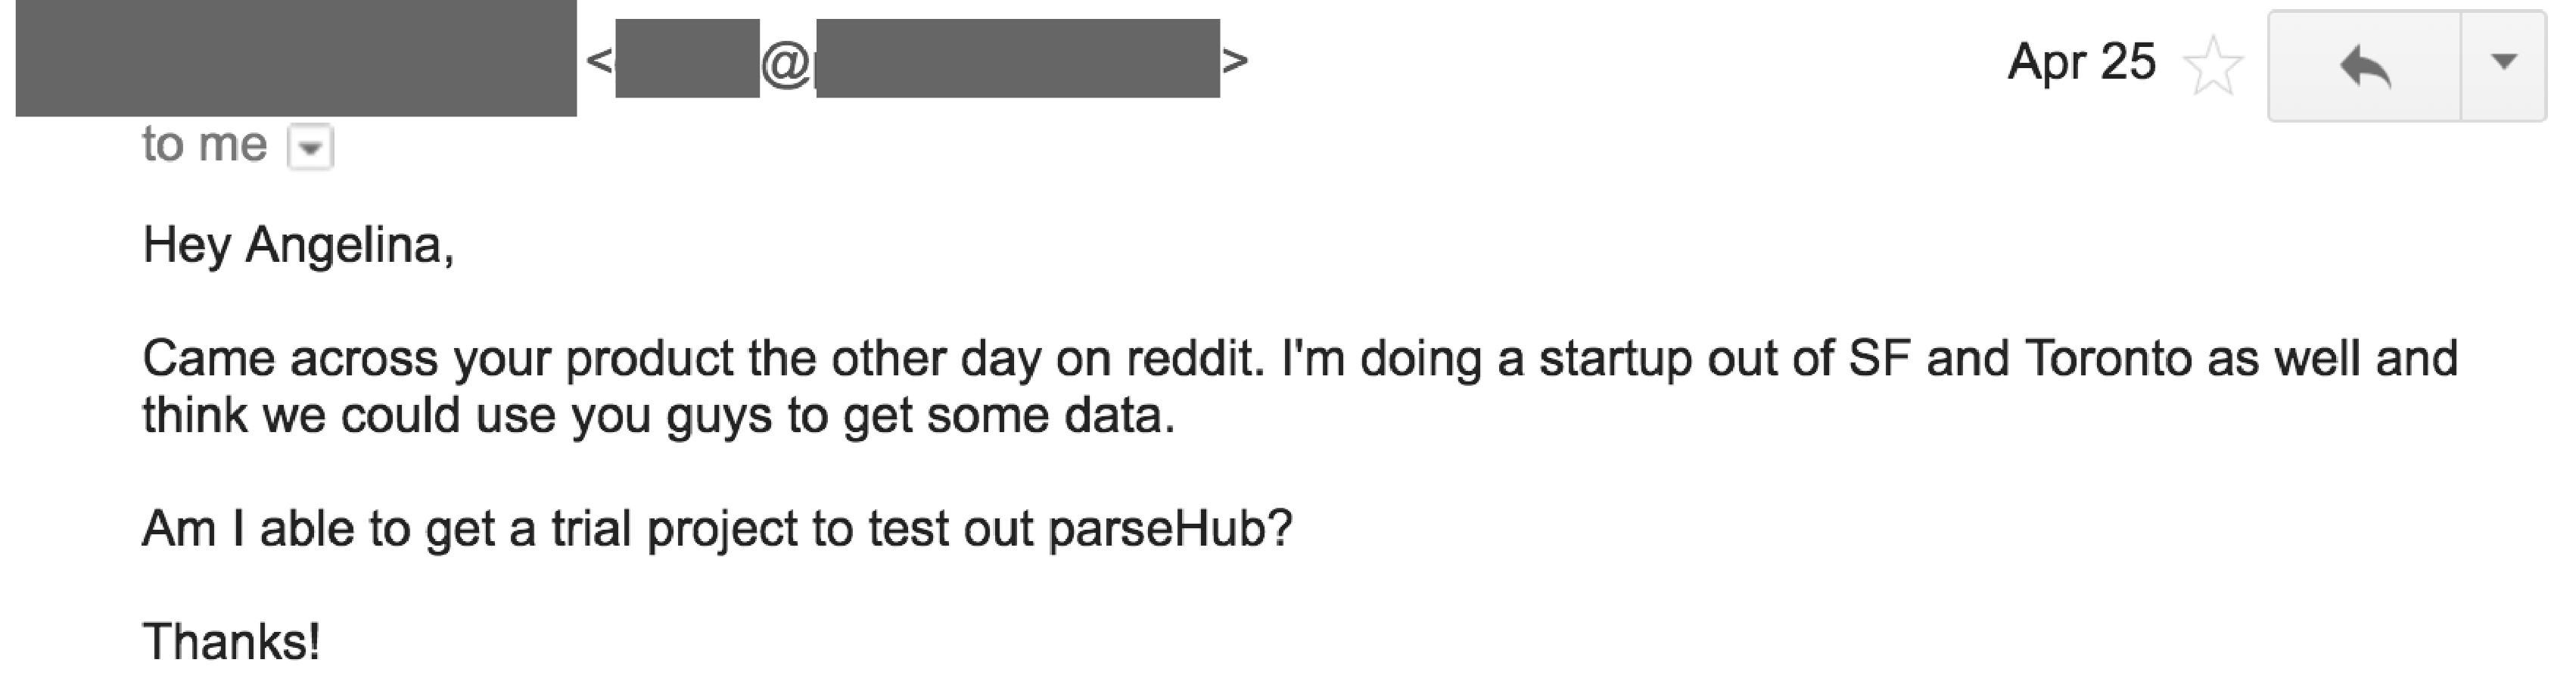 promoted ParseHub on quora